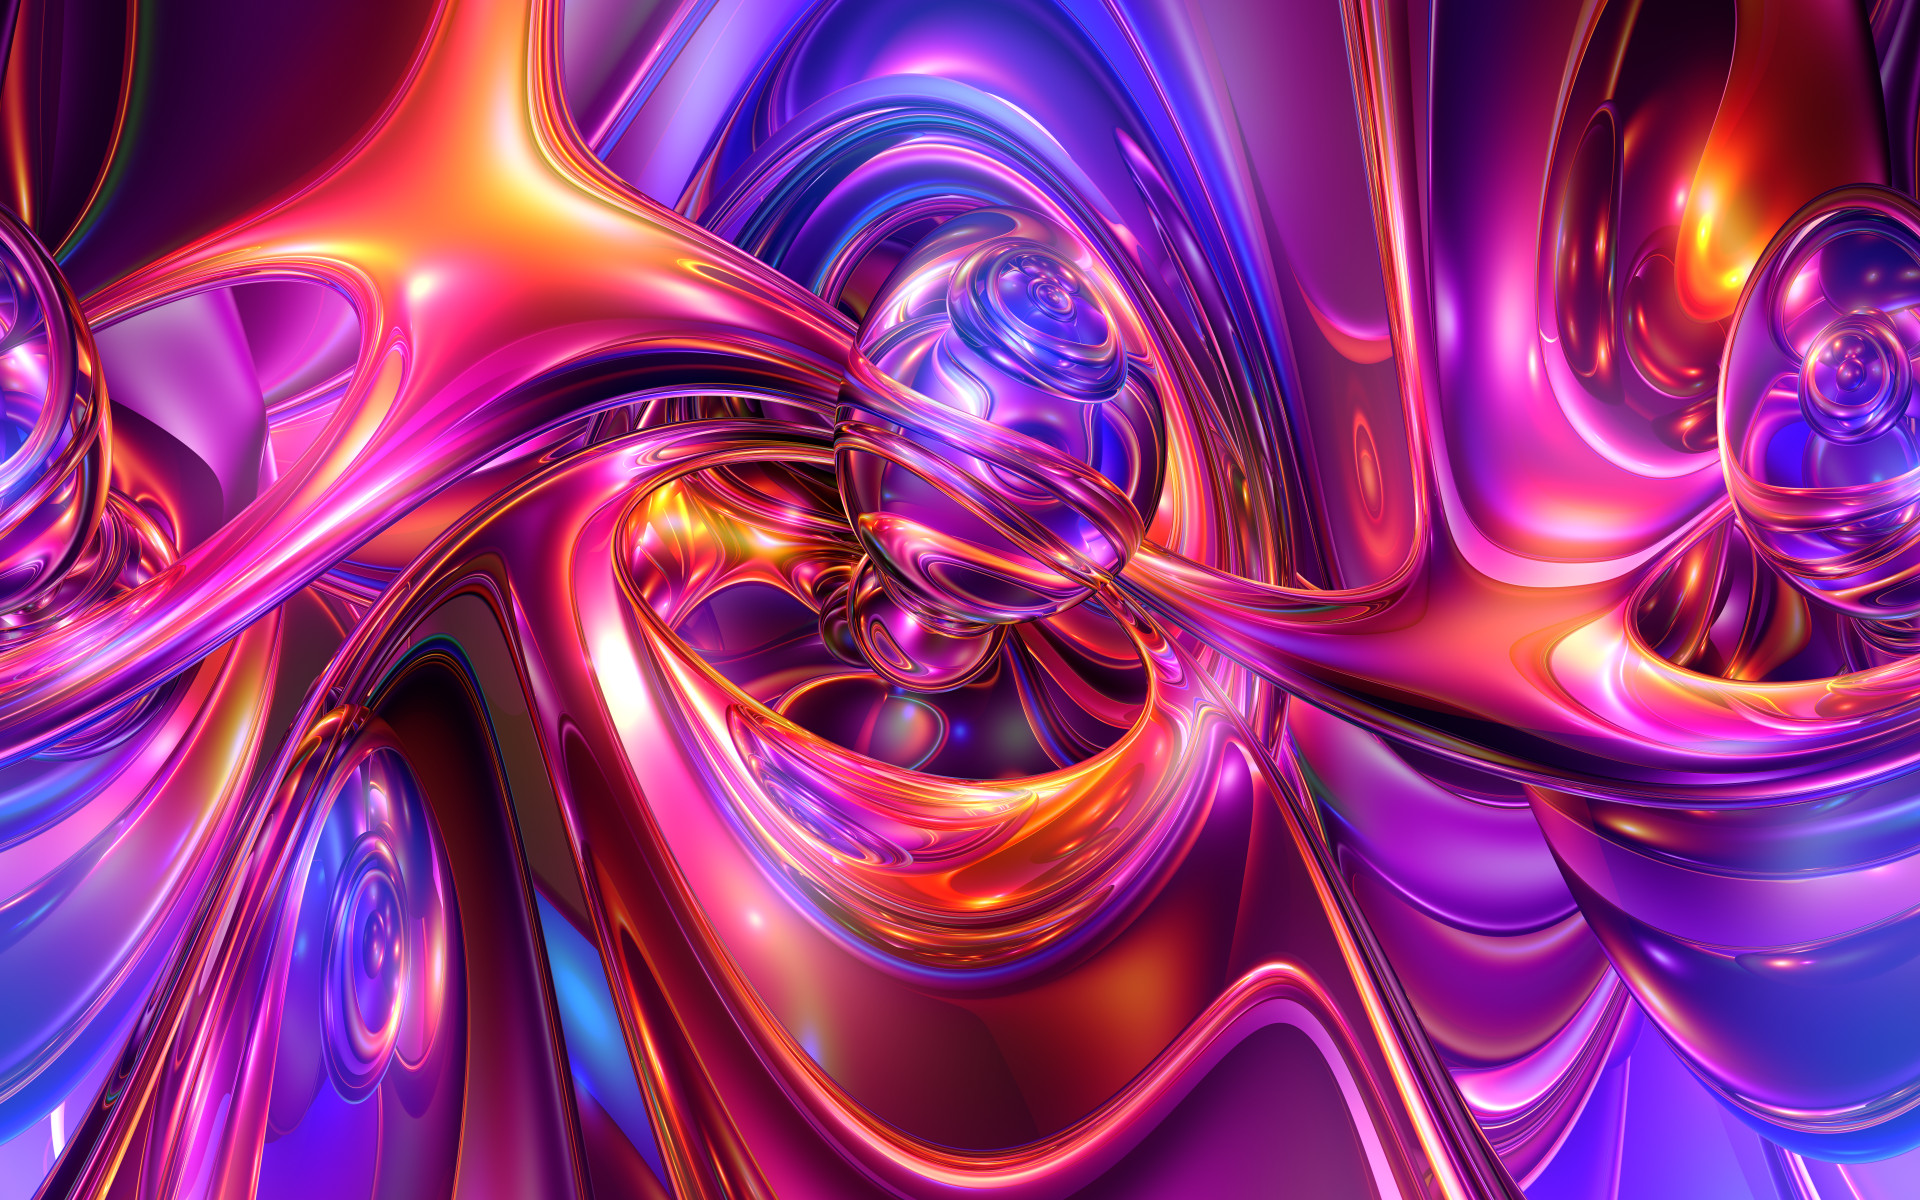 3d, purple, colorful, swirl, abstract, cgi, colors, pink